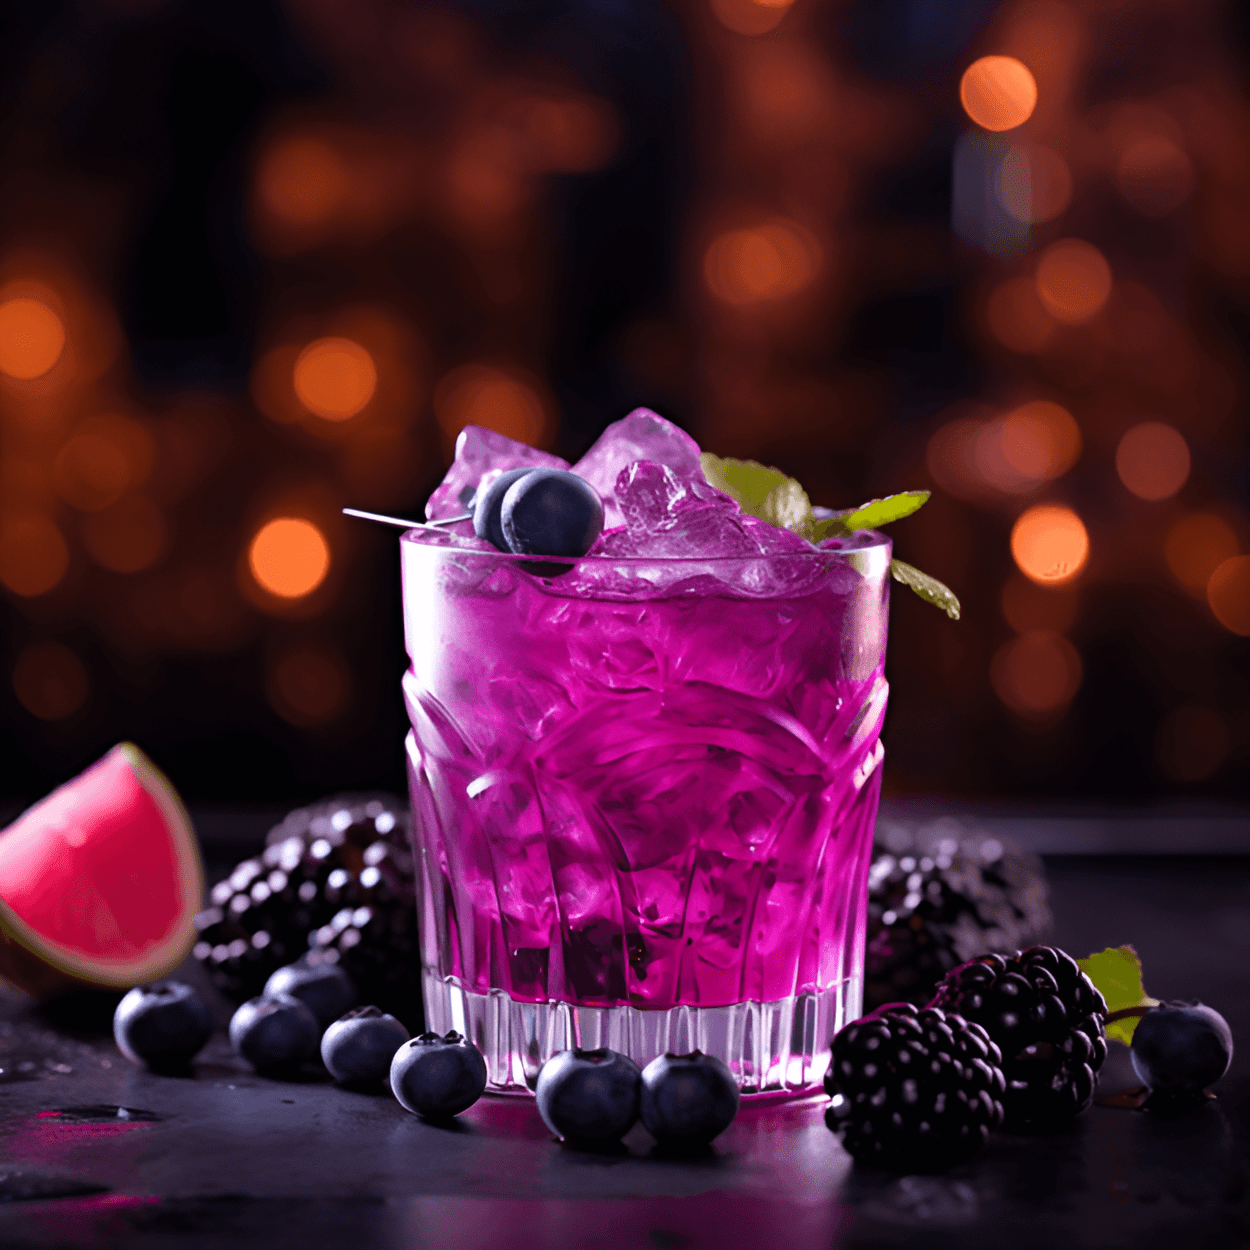 Purple Haze Cocktail Recipe - The Purple Haze cocktail is a fruity, sweet, and slightly tart drink with a hint of sourness. The combination of raspberry liqueur, vodka, and lime juice creates a well-balanced and refreshing flavor profile.